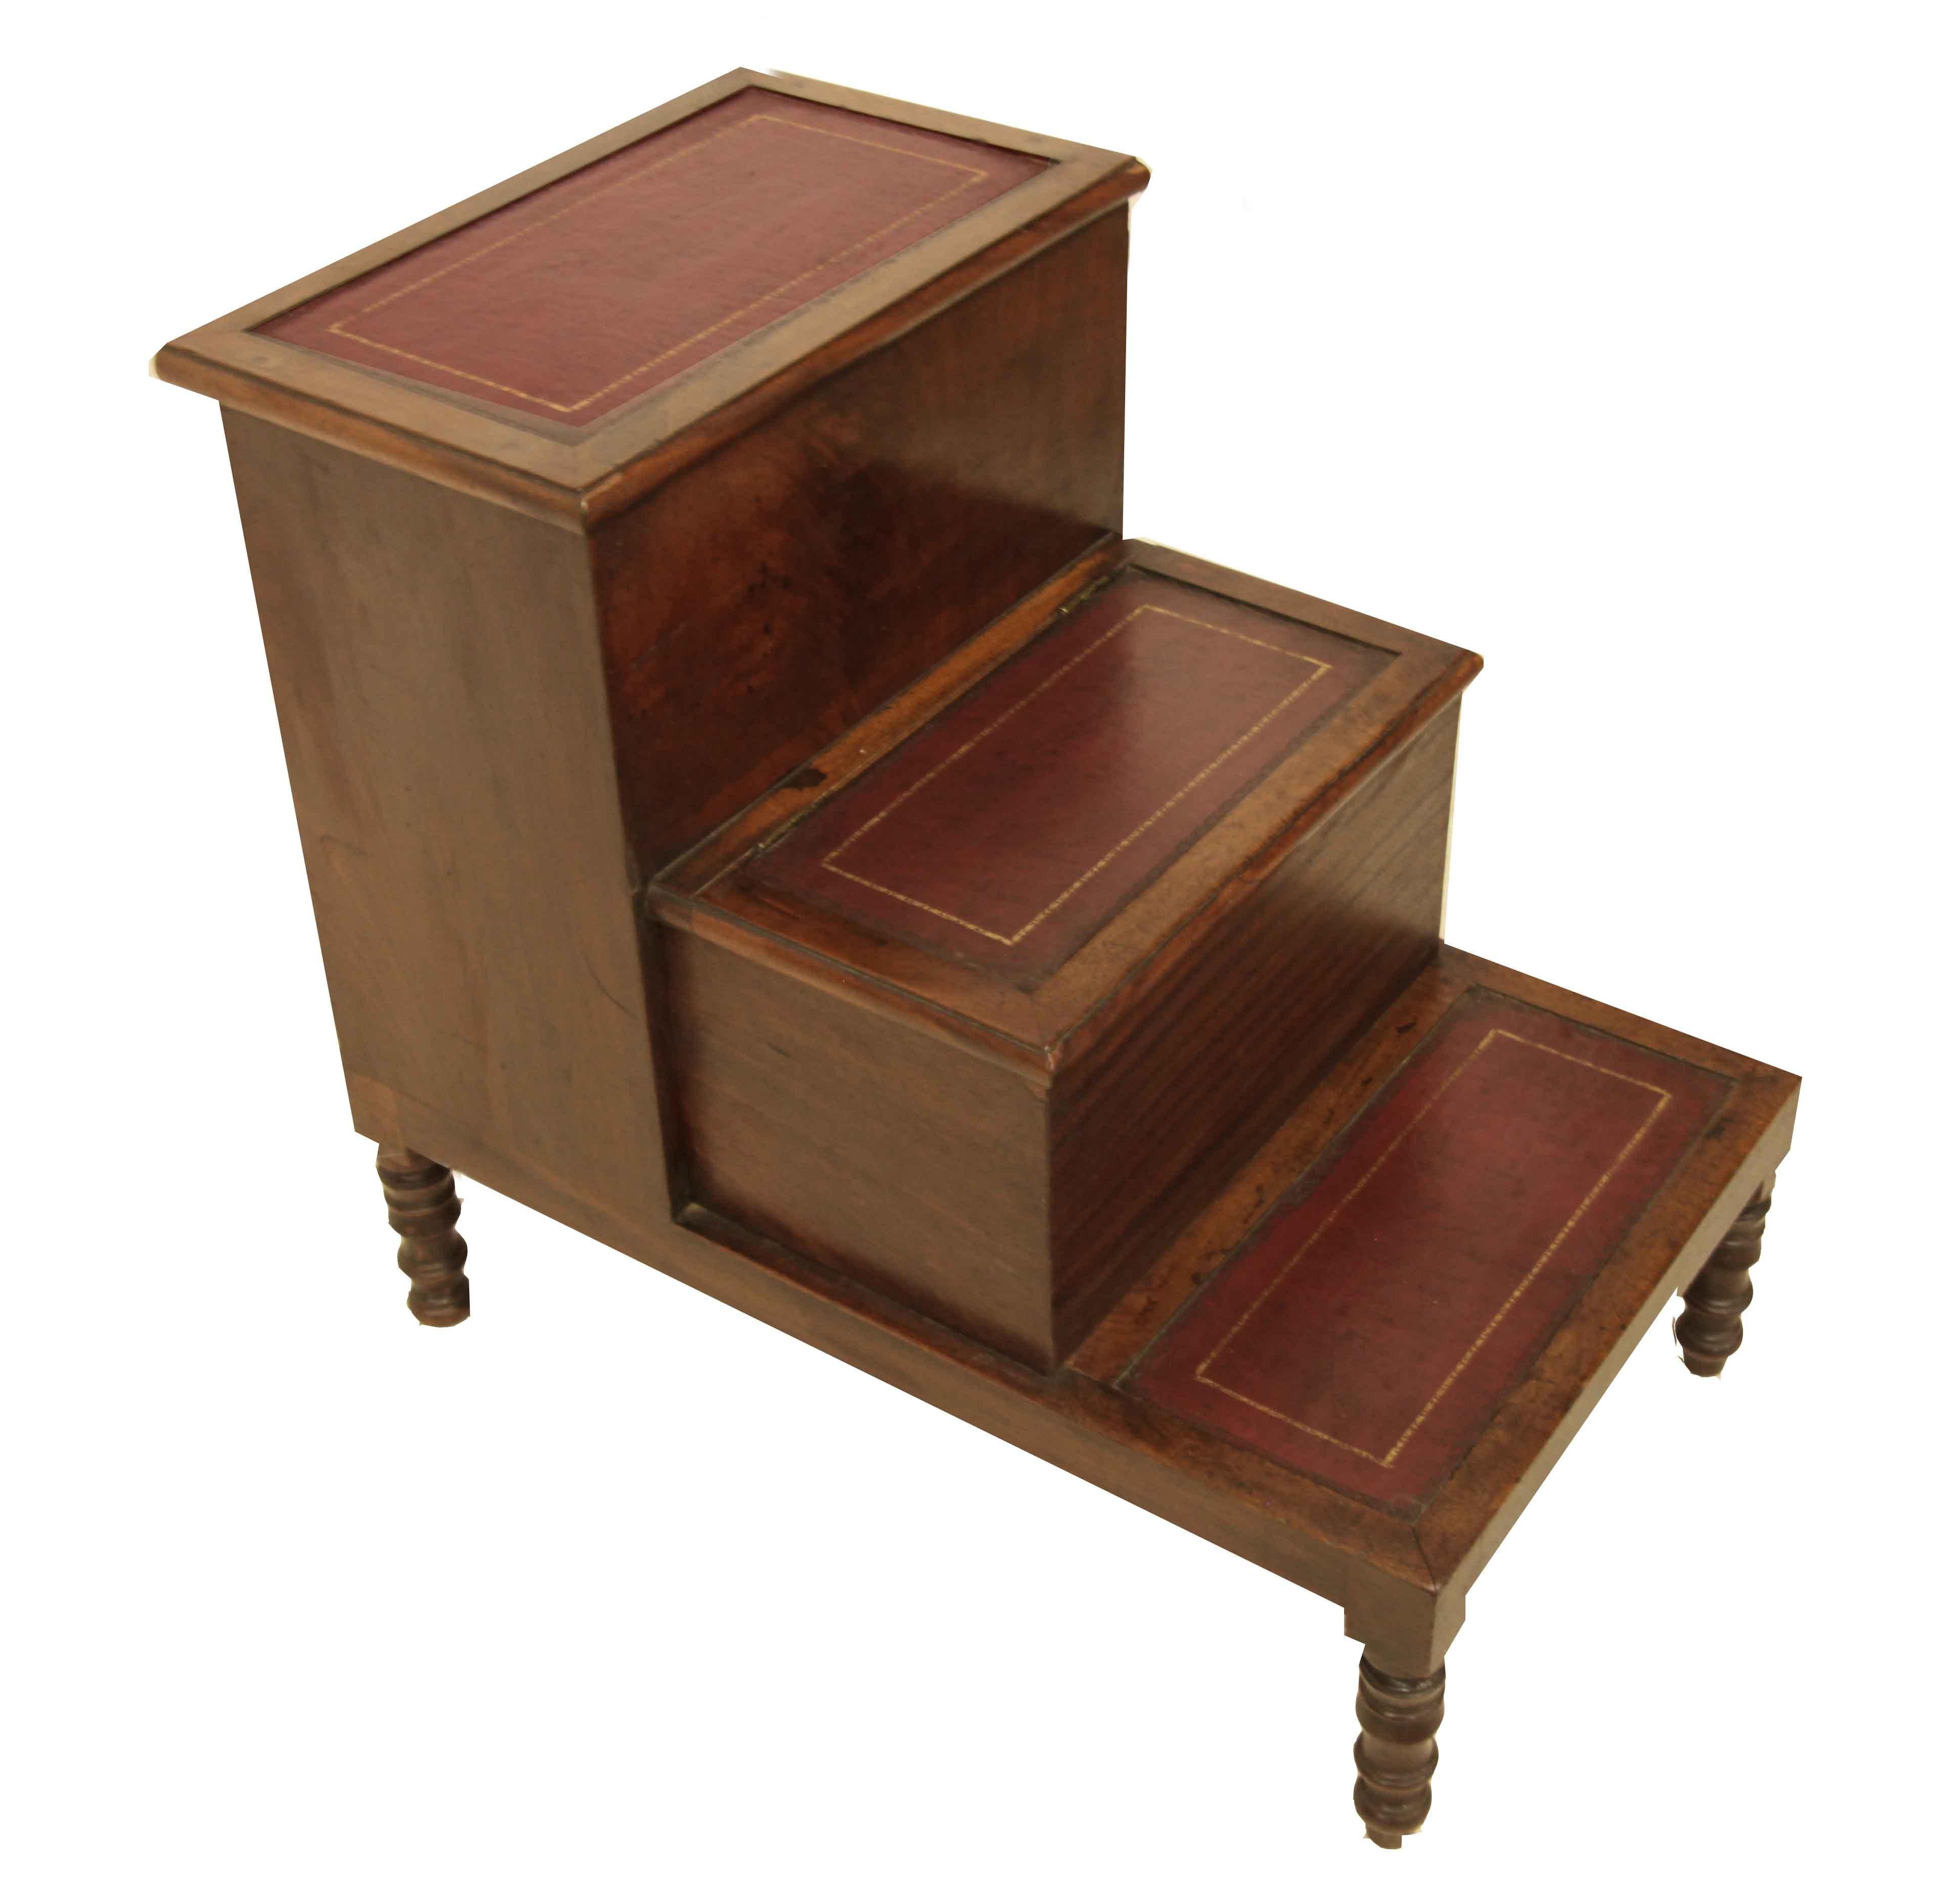 English mahogany bed steps, the three steps have tooled leather insets ( not original ) , the top step lifts up to reveal open storage, the middle step pulls out and originally had a porcelain potty.  The steps rest on turned feet. 